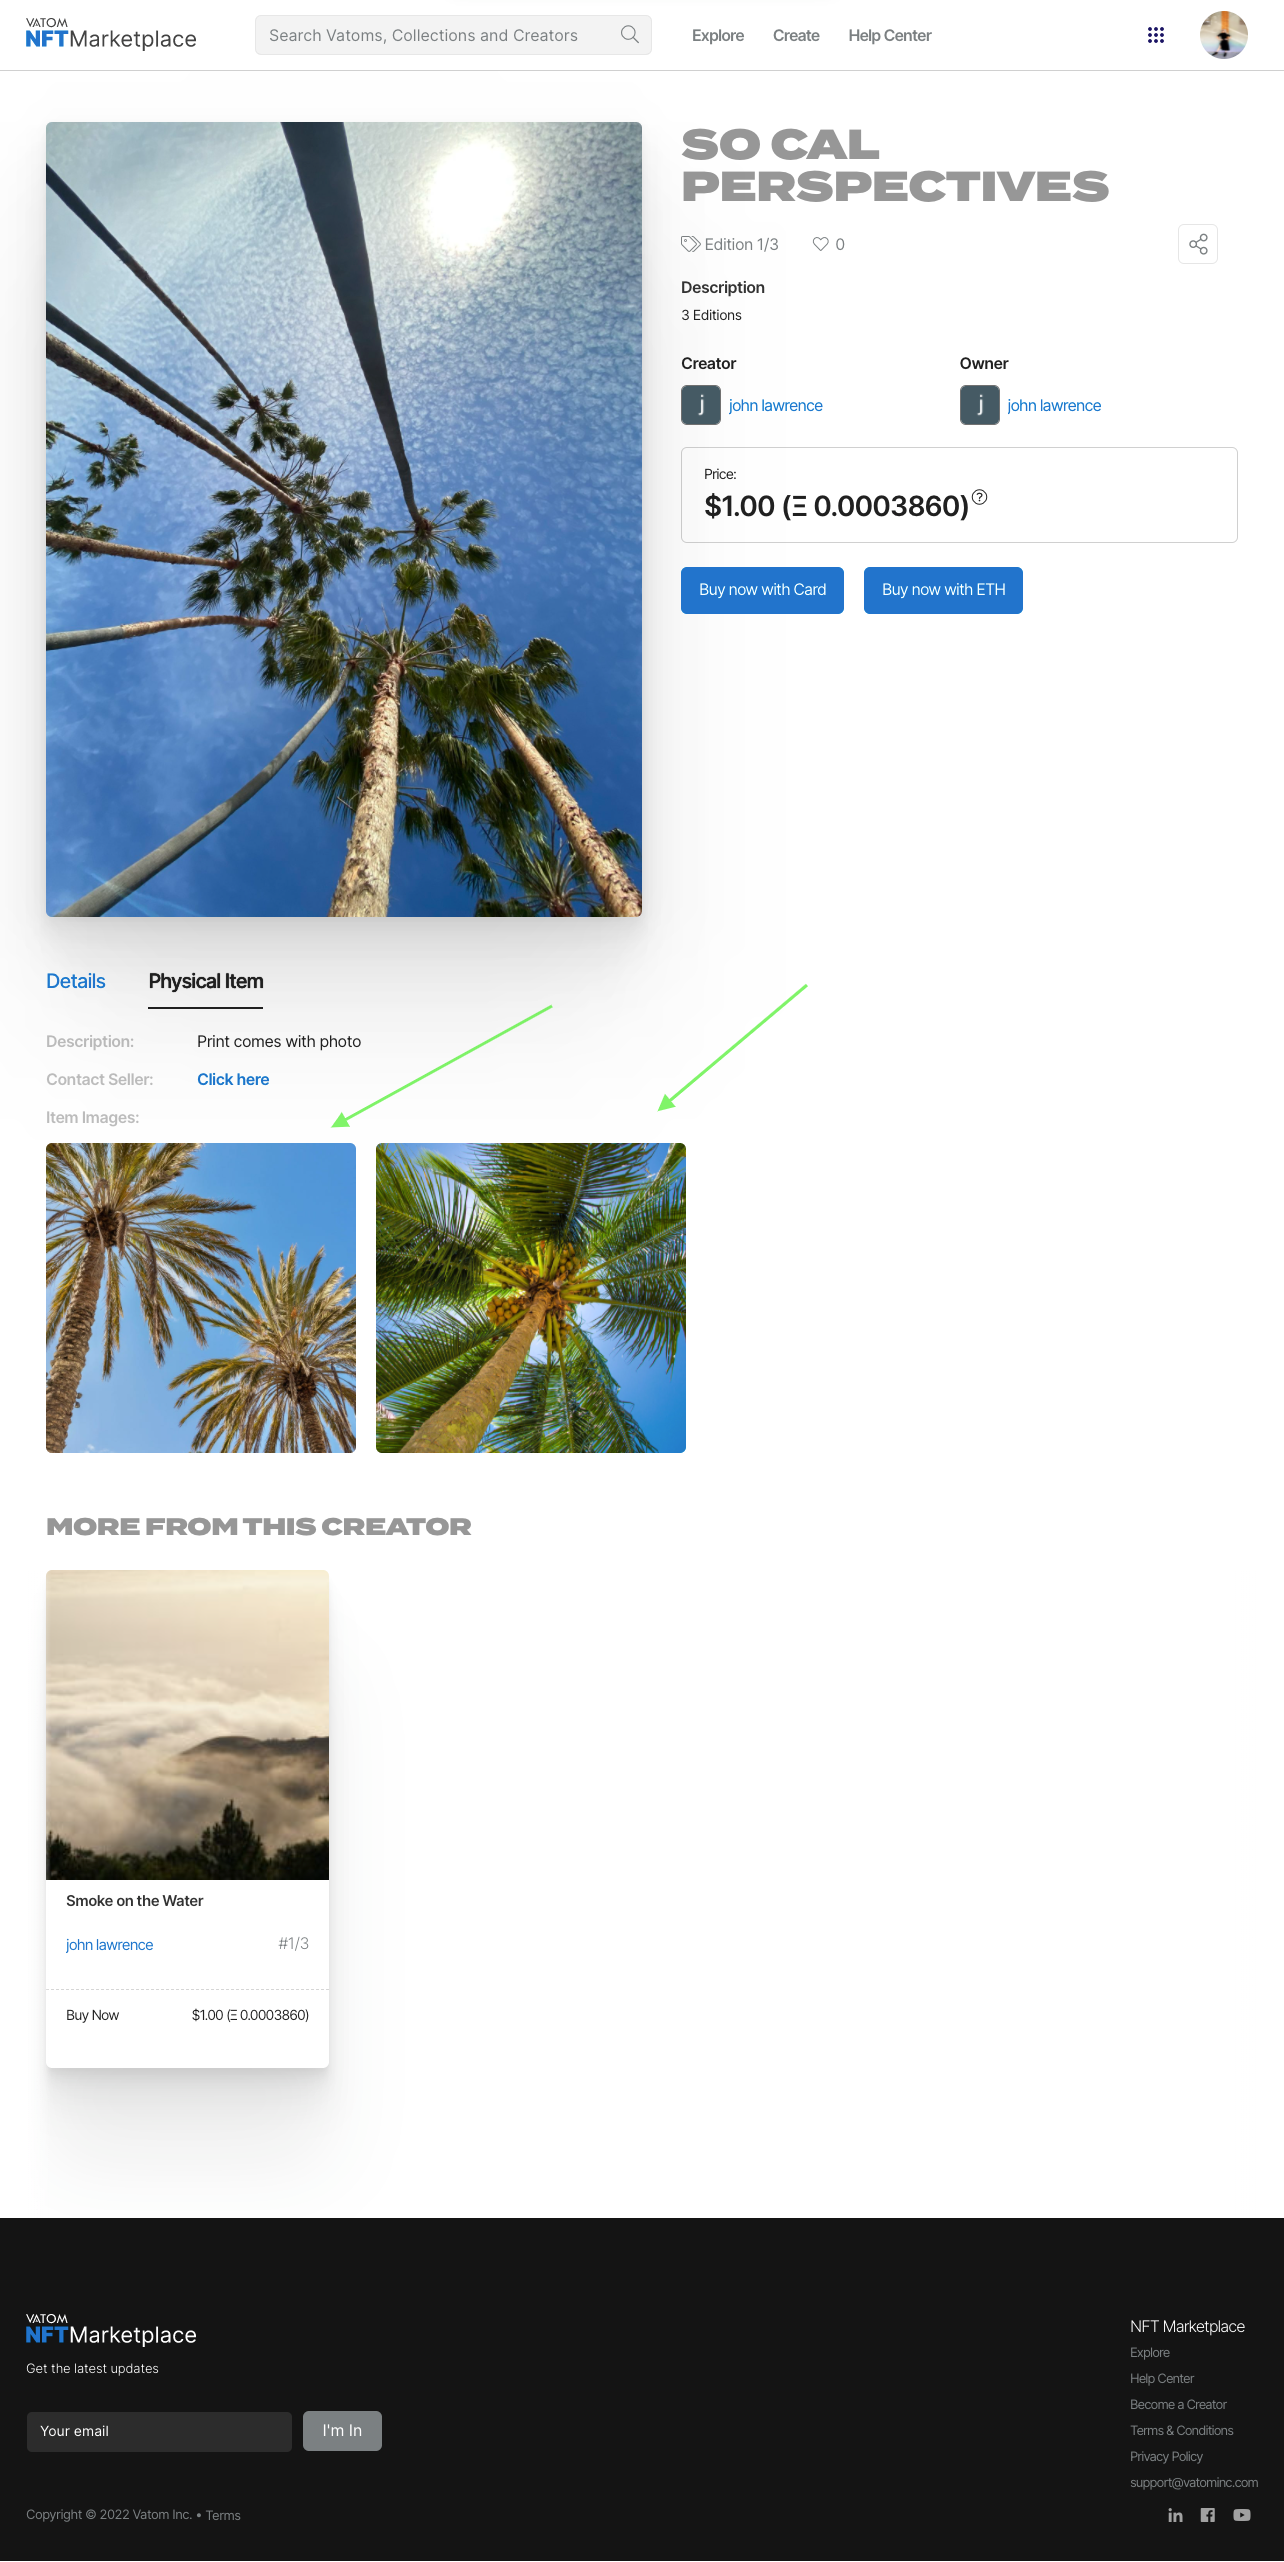 Images to other user view